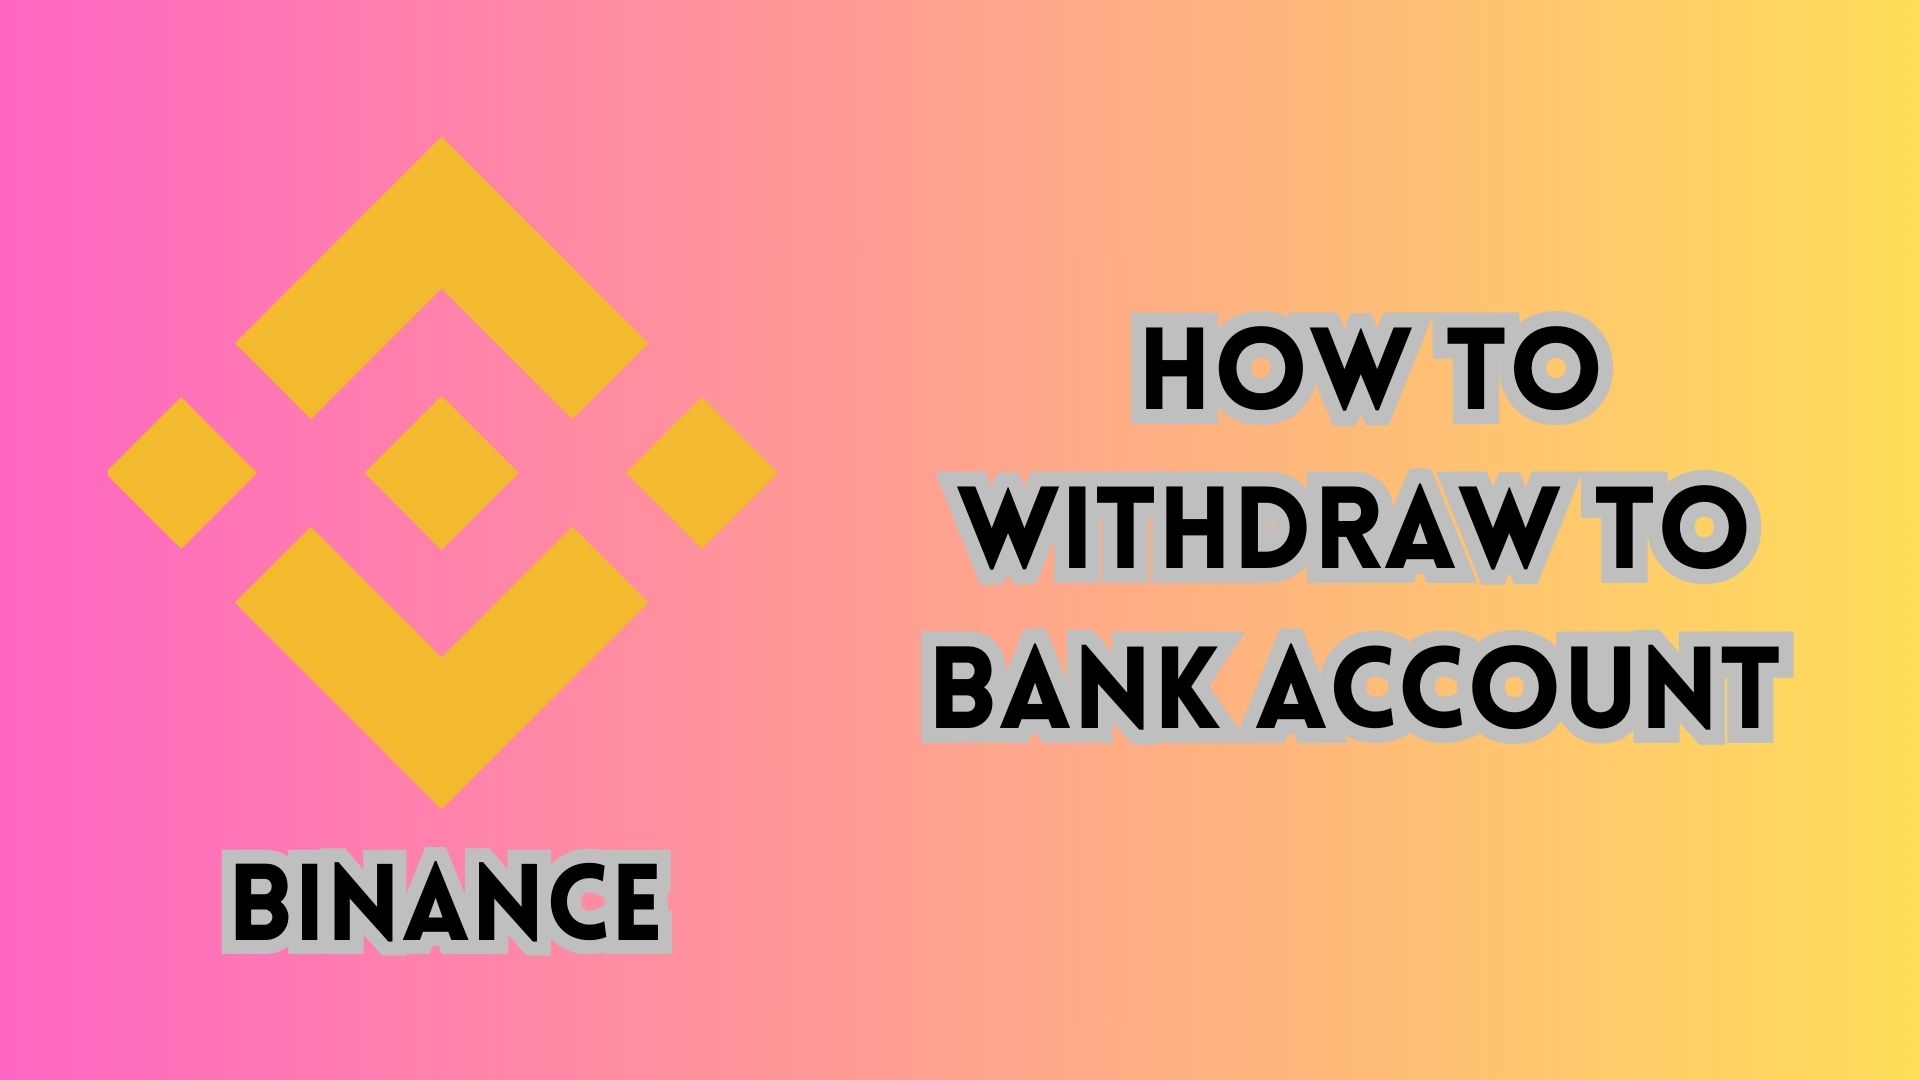 Binance How To Withdraw To Bank Account.